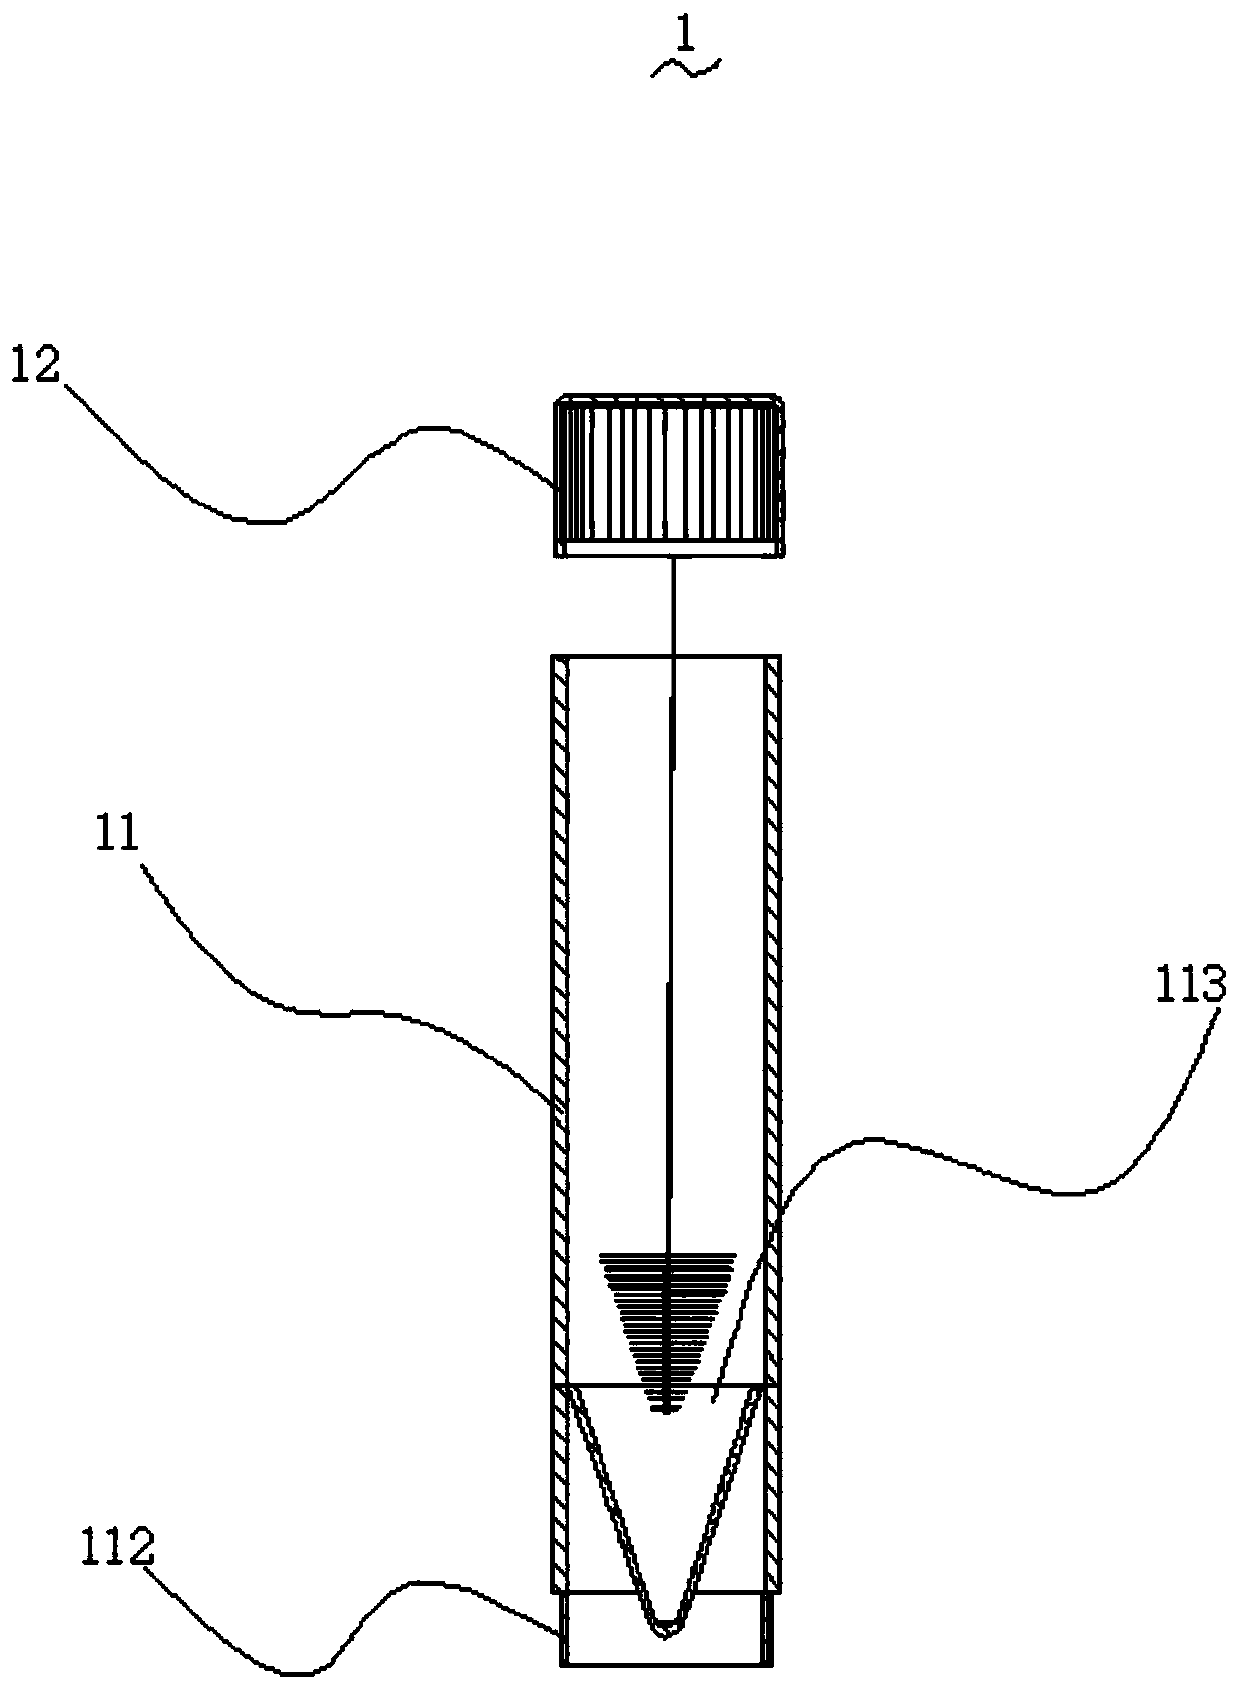 High-practicability conical-bottom erectable specimen collecting and storing device